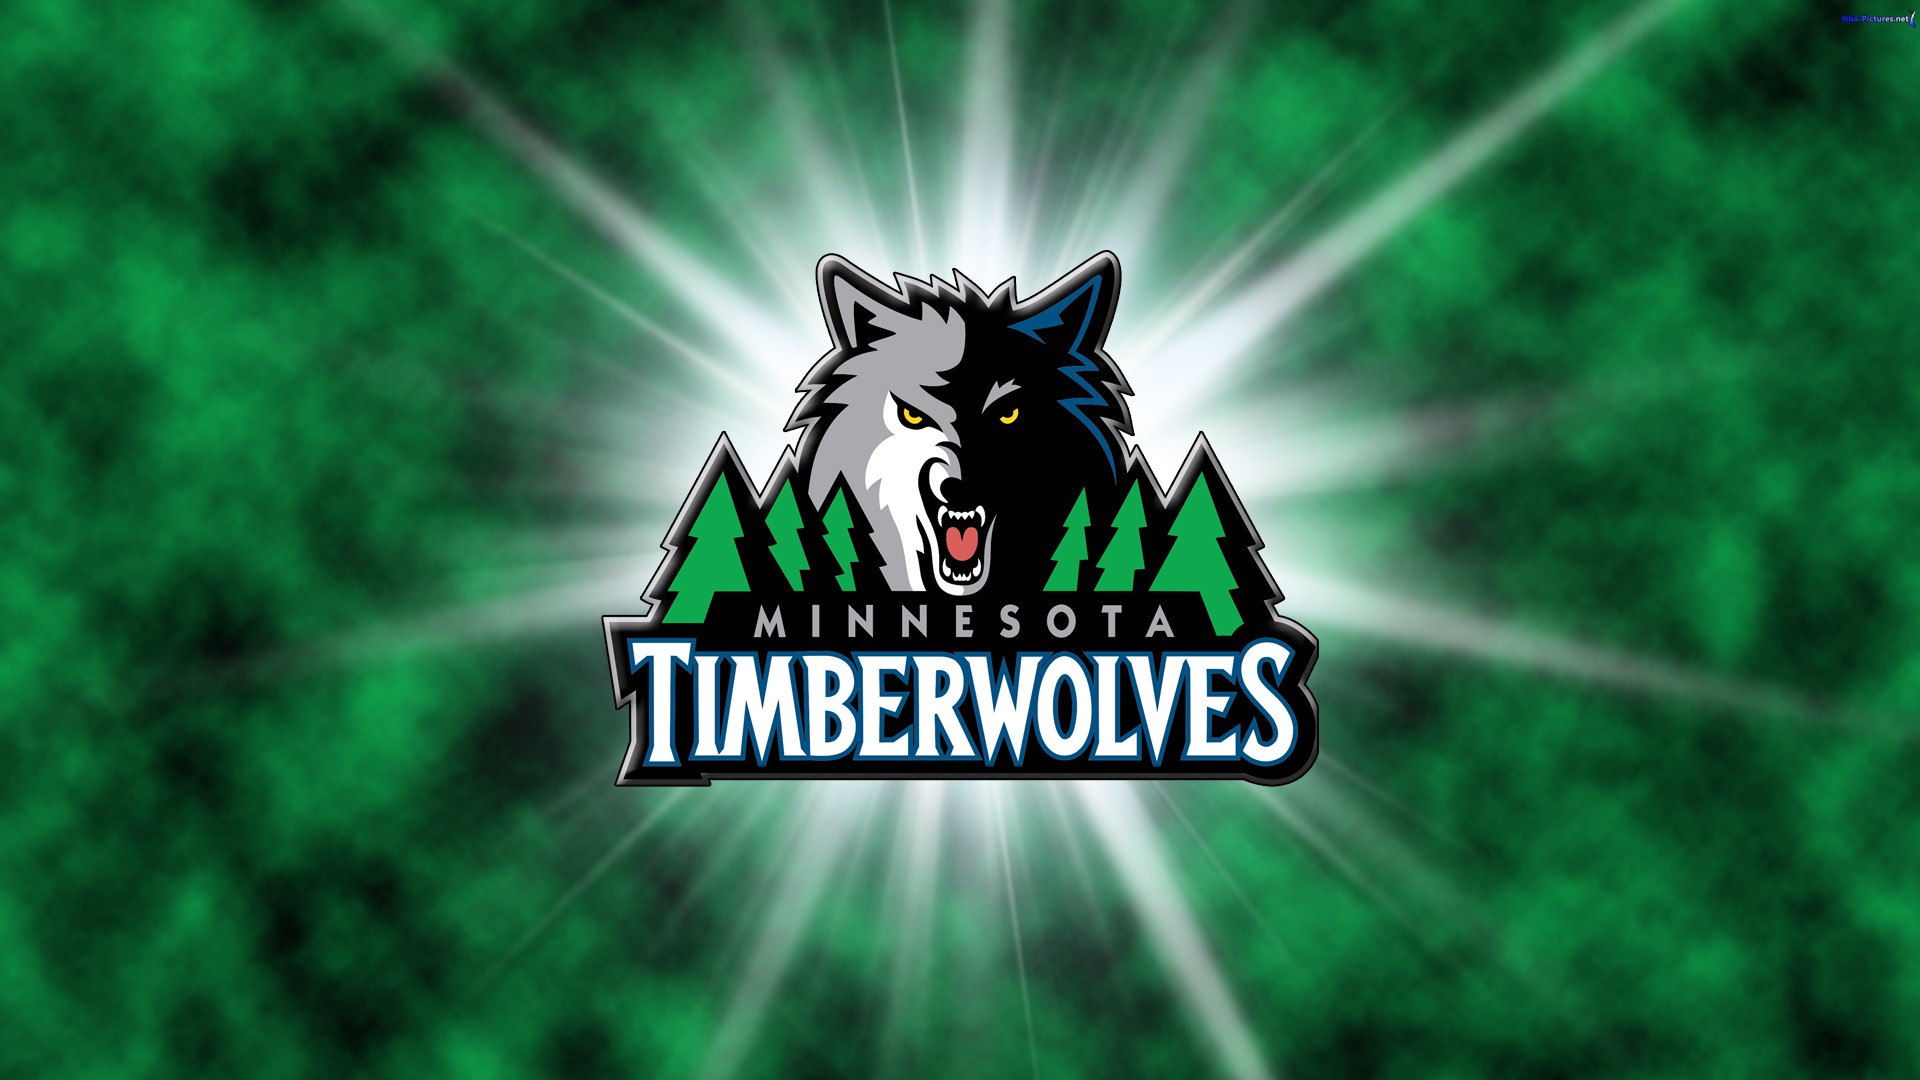 Minnesota Timberwolves For PC Wallpaper with high-resolution 1920x1080 pixel. You can use this wallpaper for your Desktop Computer Backgrounds, Windows or Mac Screensavers, iPhone Lock screen, Tablet or Android and another Mobile Phone device